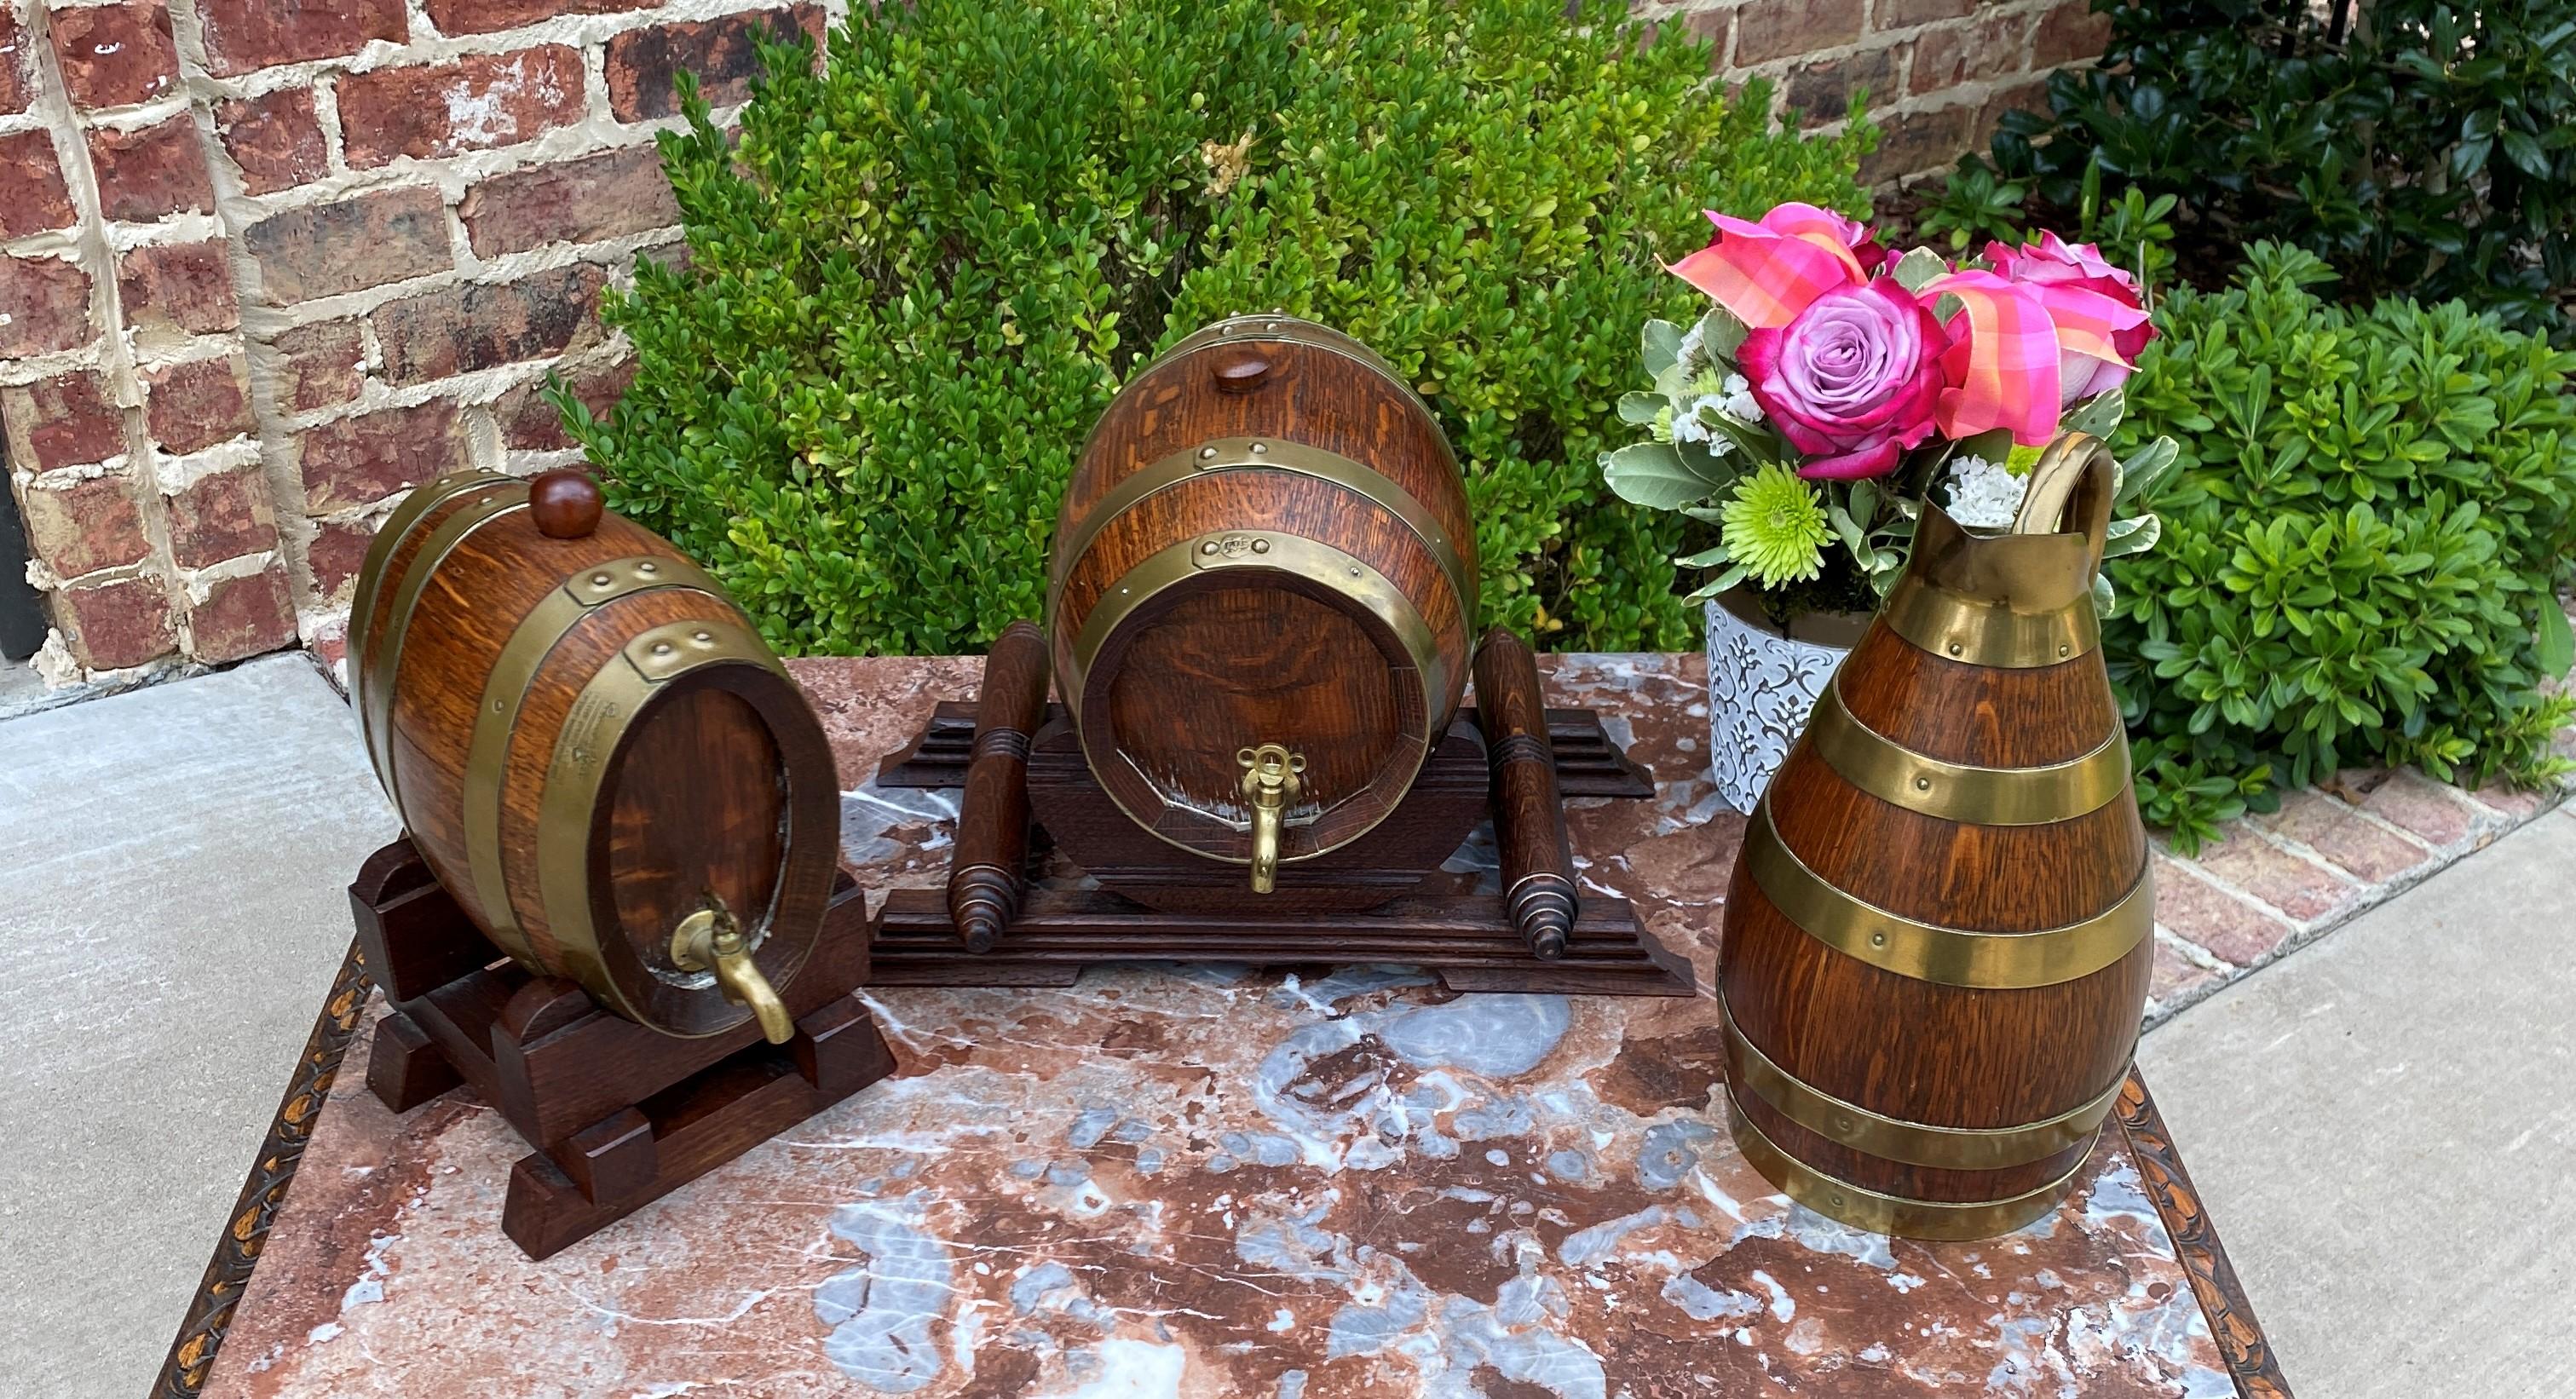 Unique set of 3 antique oak brass banded wine barrels or casks with matching pitcher/jug~~Maker's Hallmarks~~c. 1920s 
 
Two sturdy oak barrels or casks with brass banding, brass spigots and cradles~~also included is the matching pitcher or